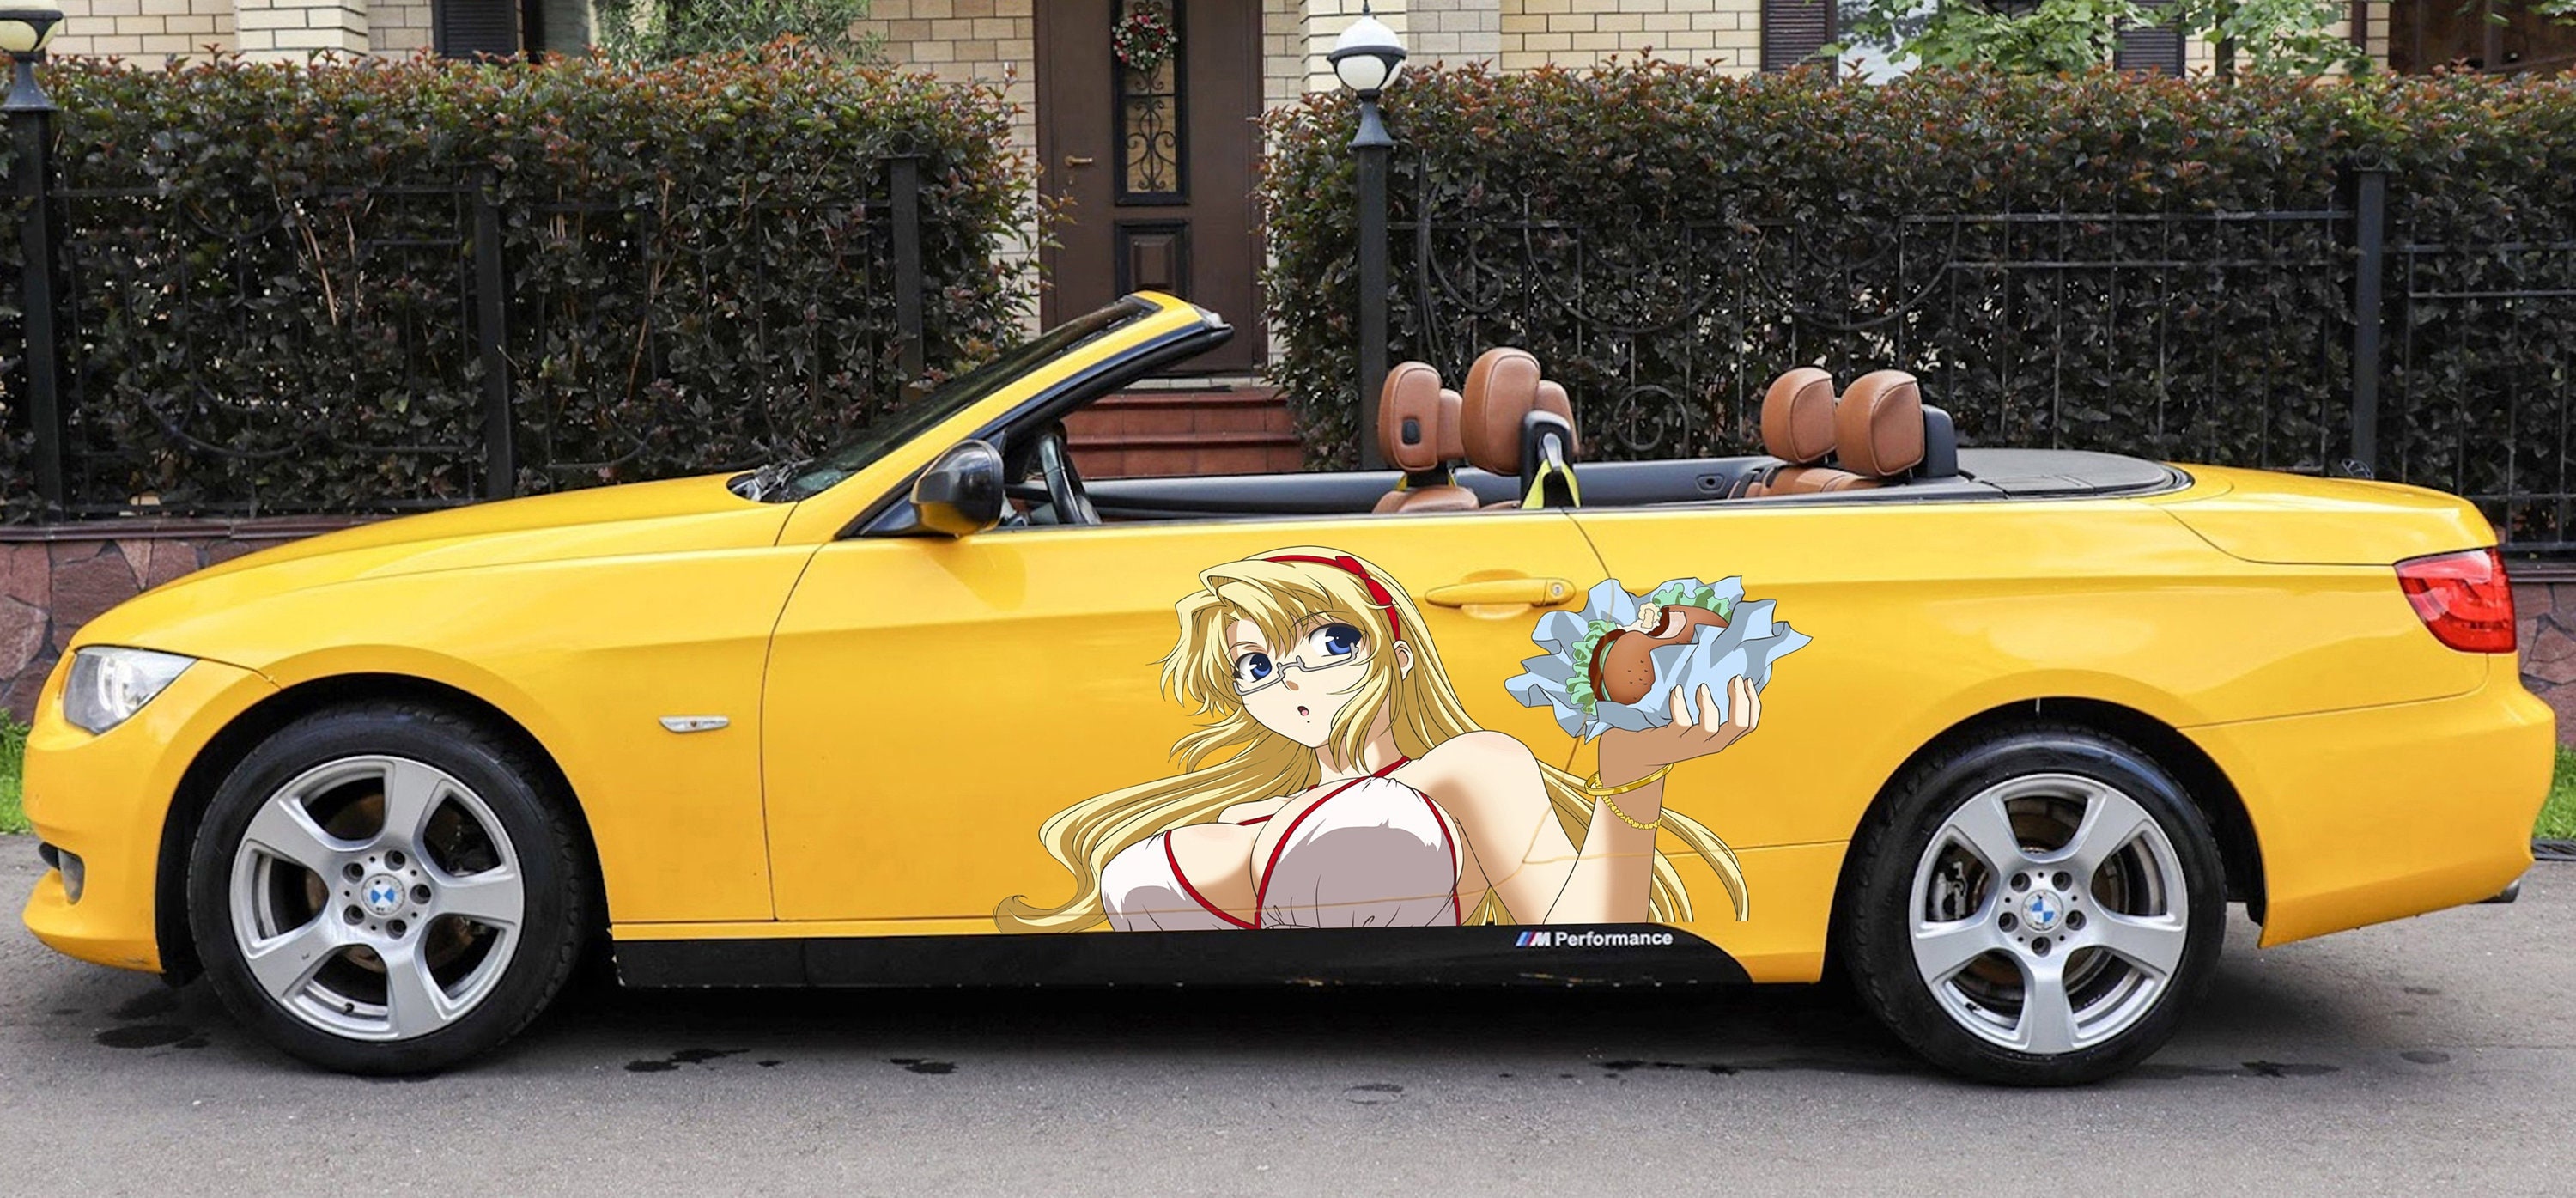 Anime Car Decals Factory Sale - www.puzzlewood.net 1695916729